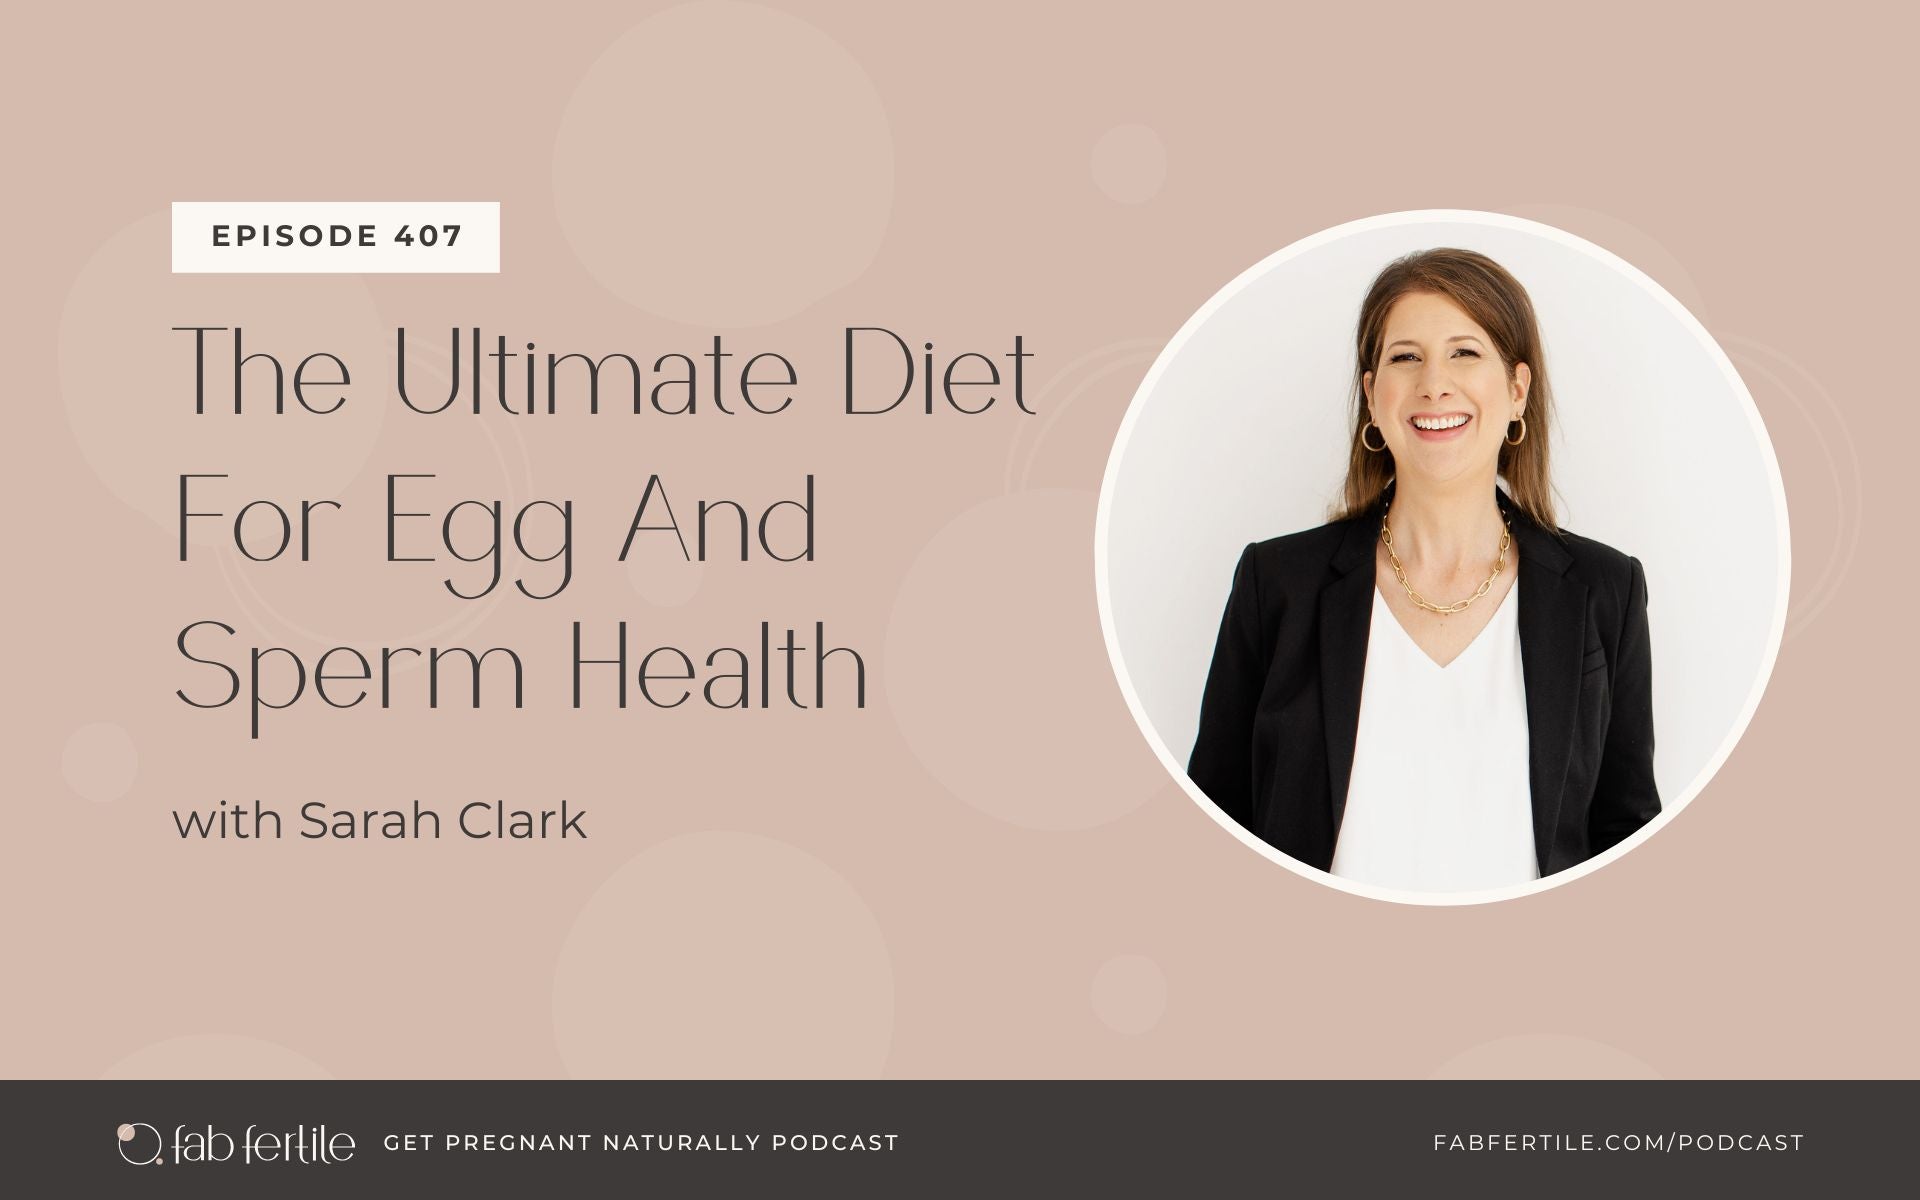 The Ultimate Diet For Egg And Sperm Health